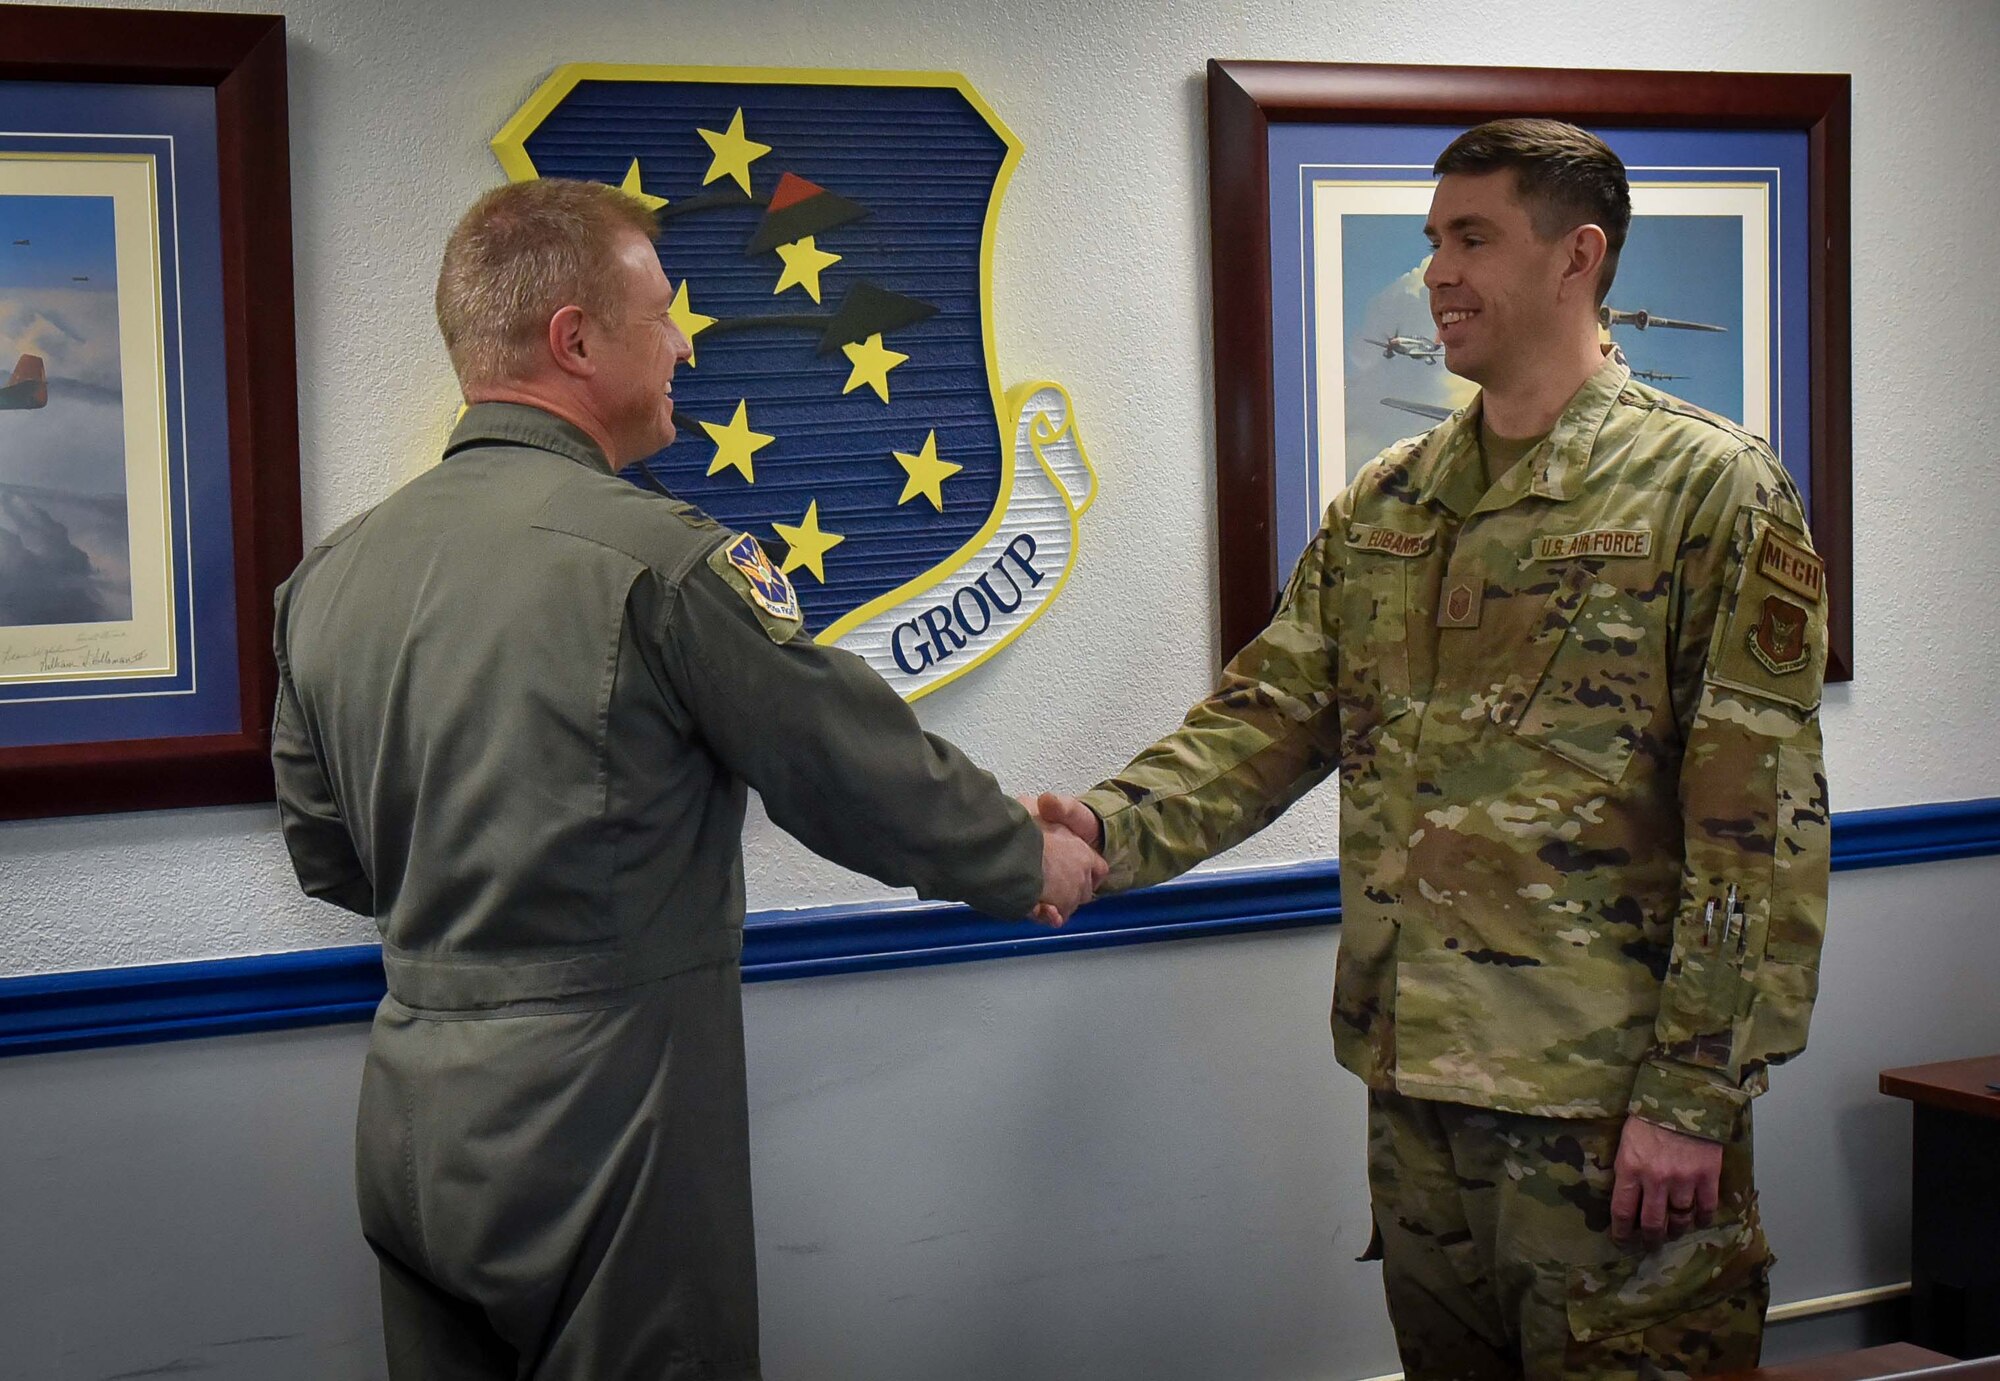 (left) 301st Fighter Wing Commander Col. Allen Duckworth gives his commander's coin to recognize Master Sgt. Derek Eubanks, 44 FG F-22 production superintendent during the wing's visit to the 44 FG at Eglin Air Force Base, Fla., March 4.
Eubanks is responsible for all flight line maintenance actions and sortie generation. Over the past four months, he has strengthened the group’s relationship with the 325th Fighter Wing, Air Combat Command, Eglin AFB, Fla., by the actions he and his team have done to provide F-22 solutions while maintaining airframe excellence. (U.S. Air Force photo by Master Sgt. Jeremy Roman)